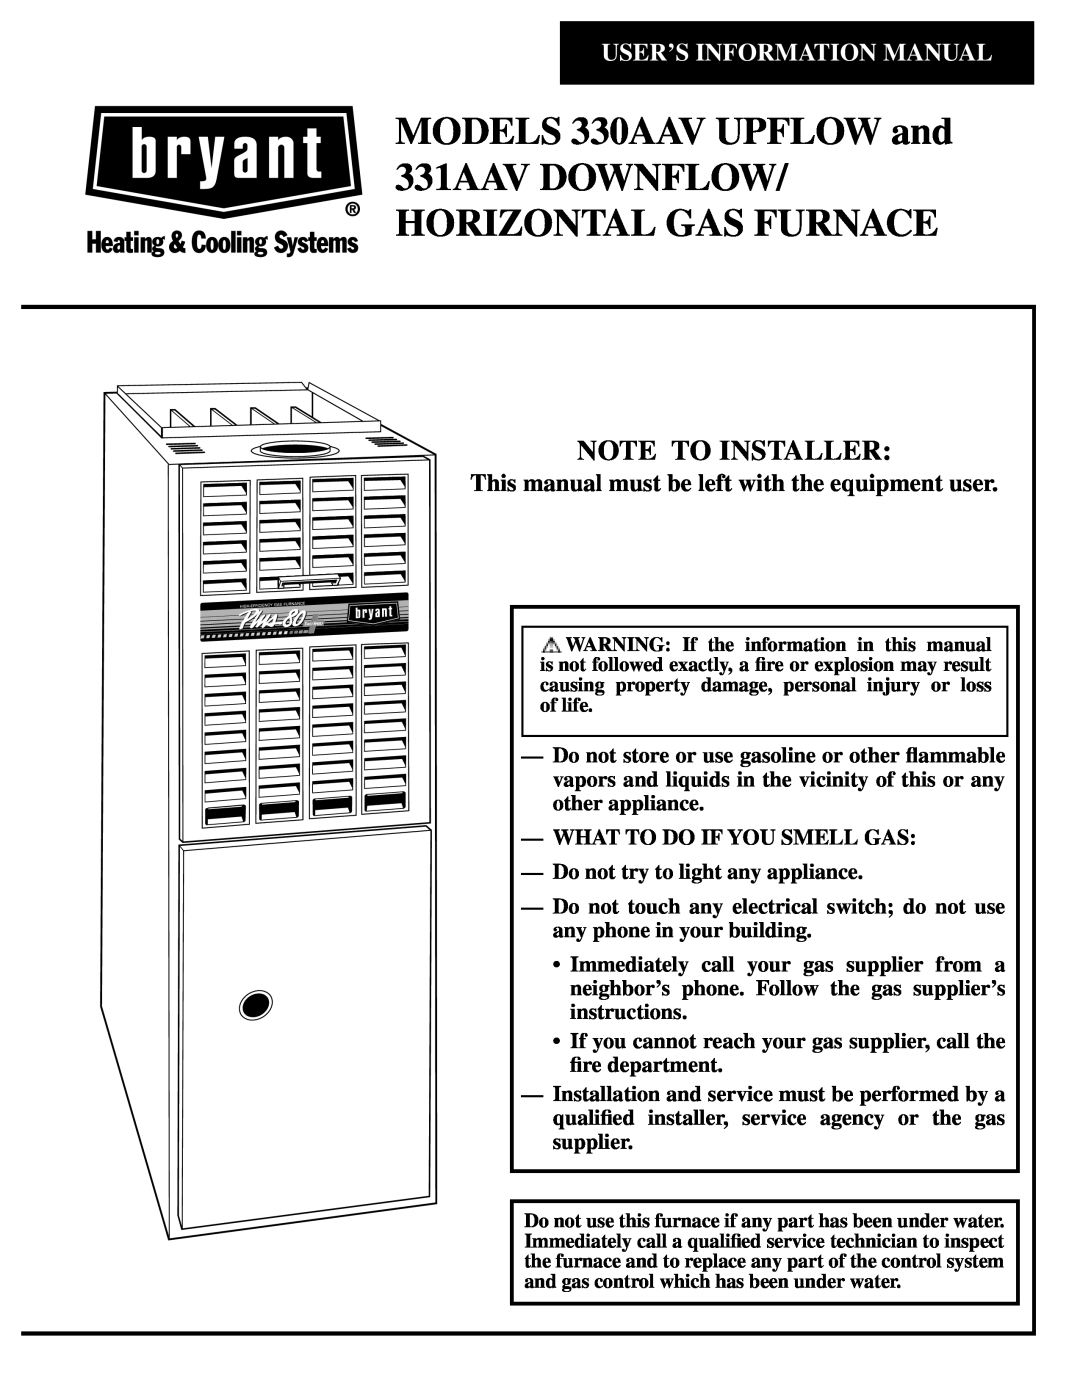 Bryant 330AAV manual This manual must be left with the equipment user, Note To Installer, User’S Information Manual 